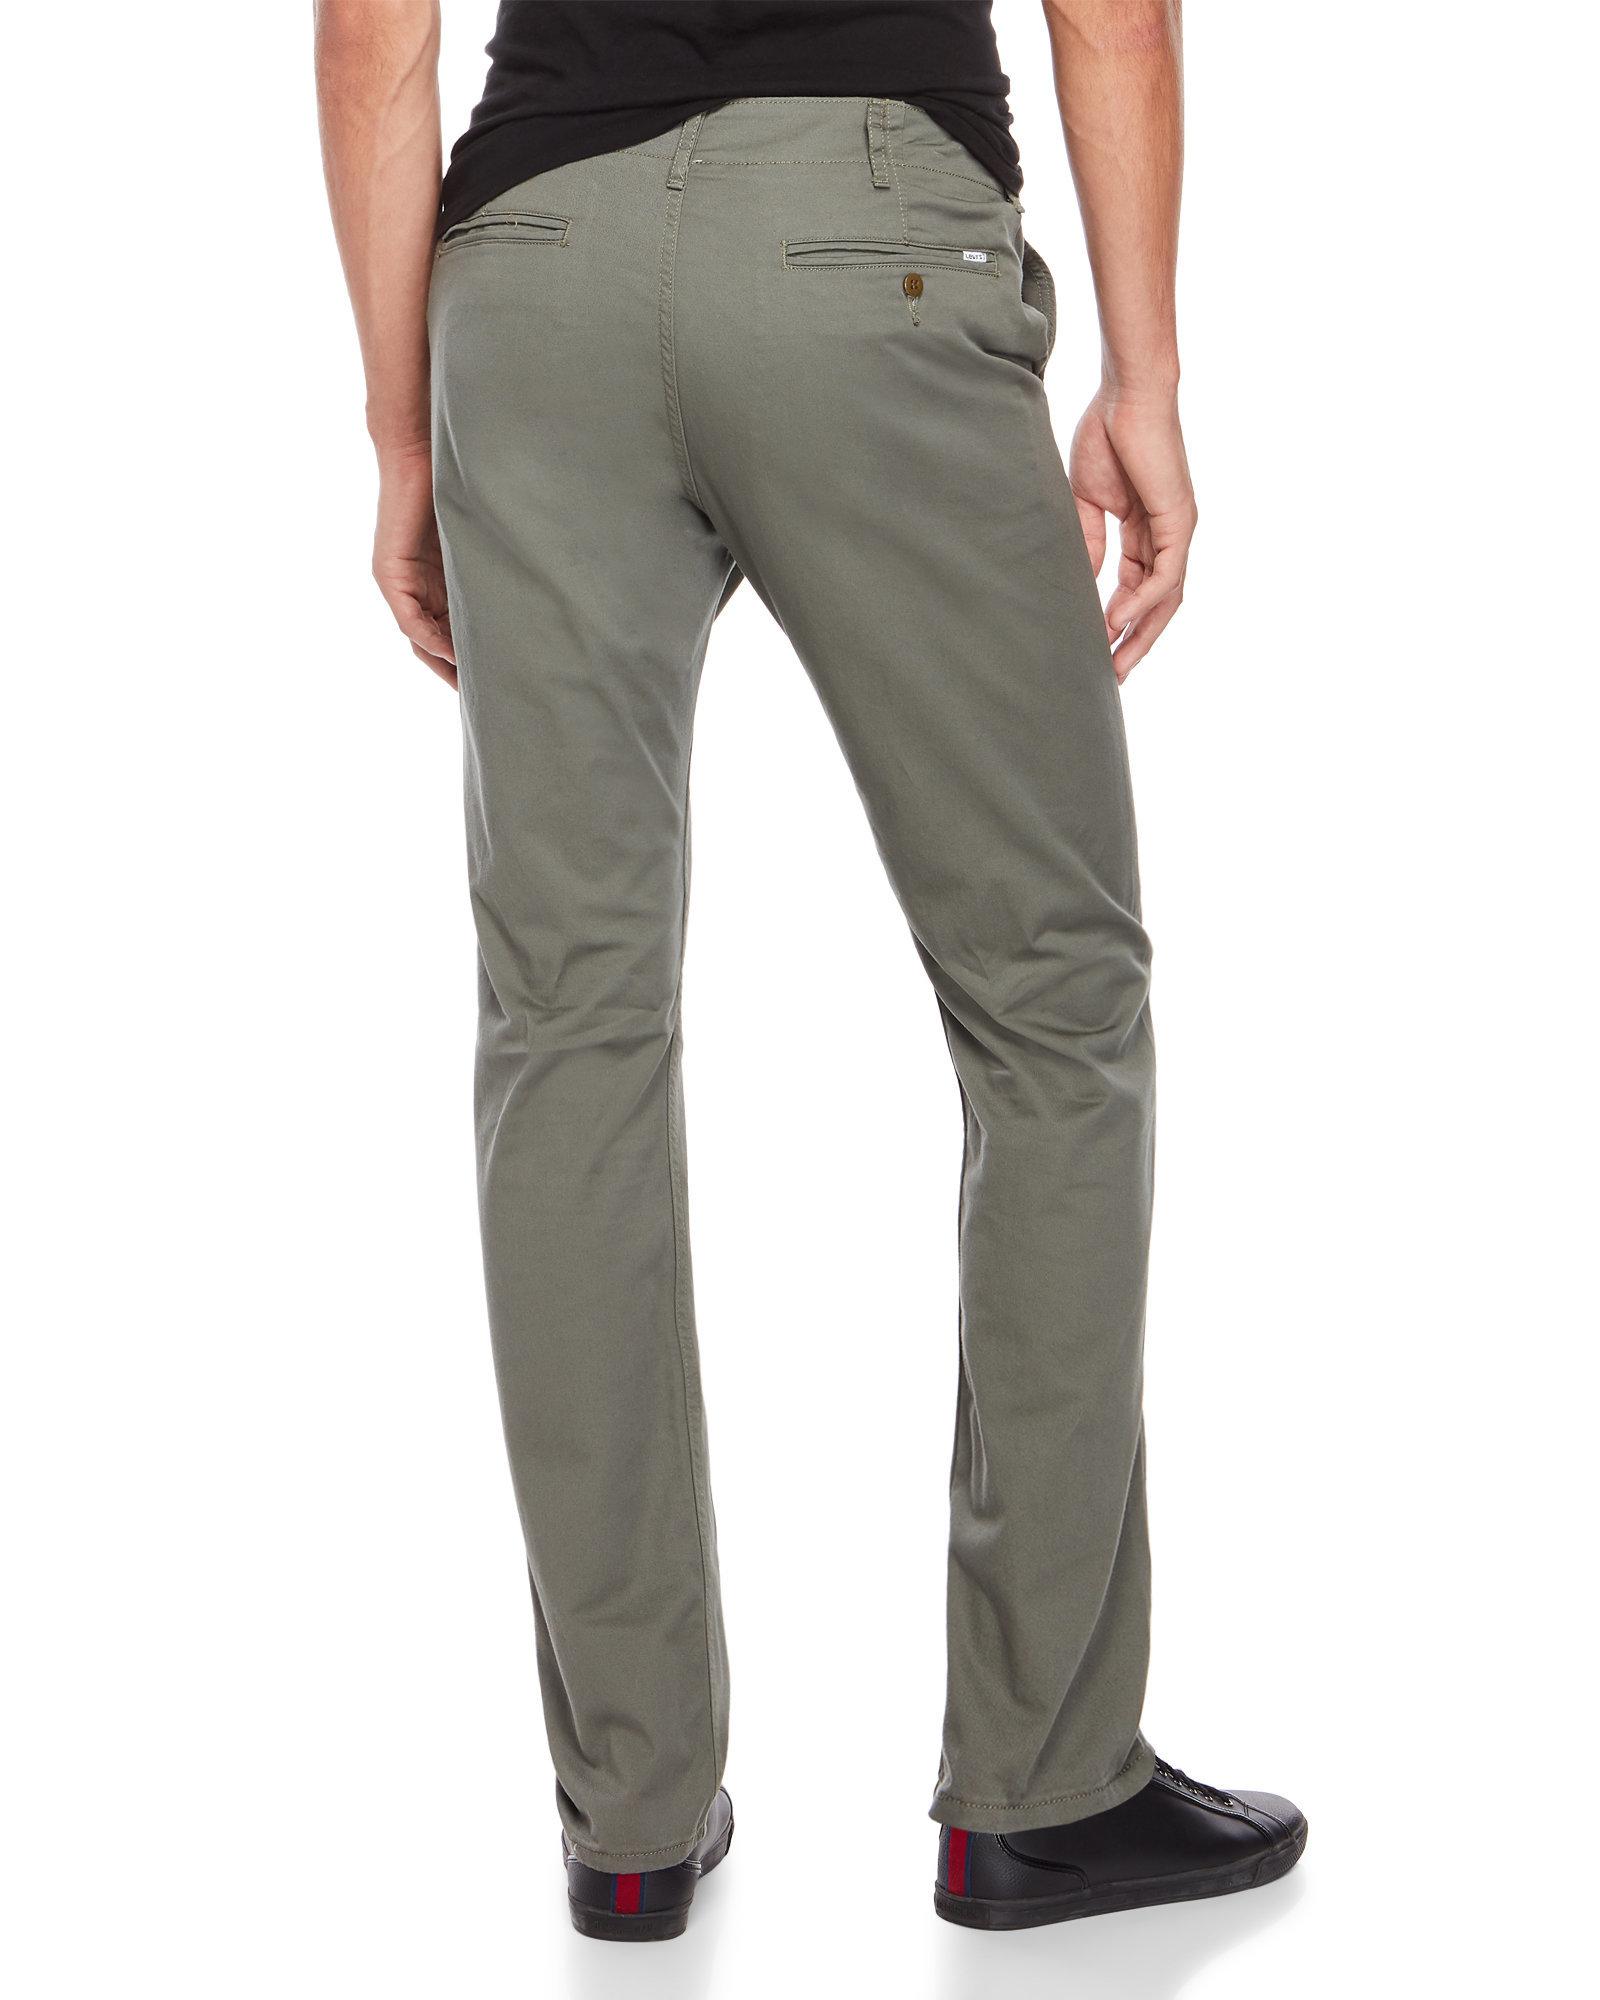 Levi's Cotton 502 Twill Chino Pants in Green for Men - Lyst